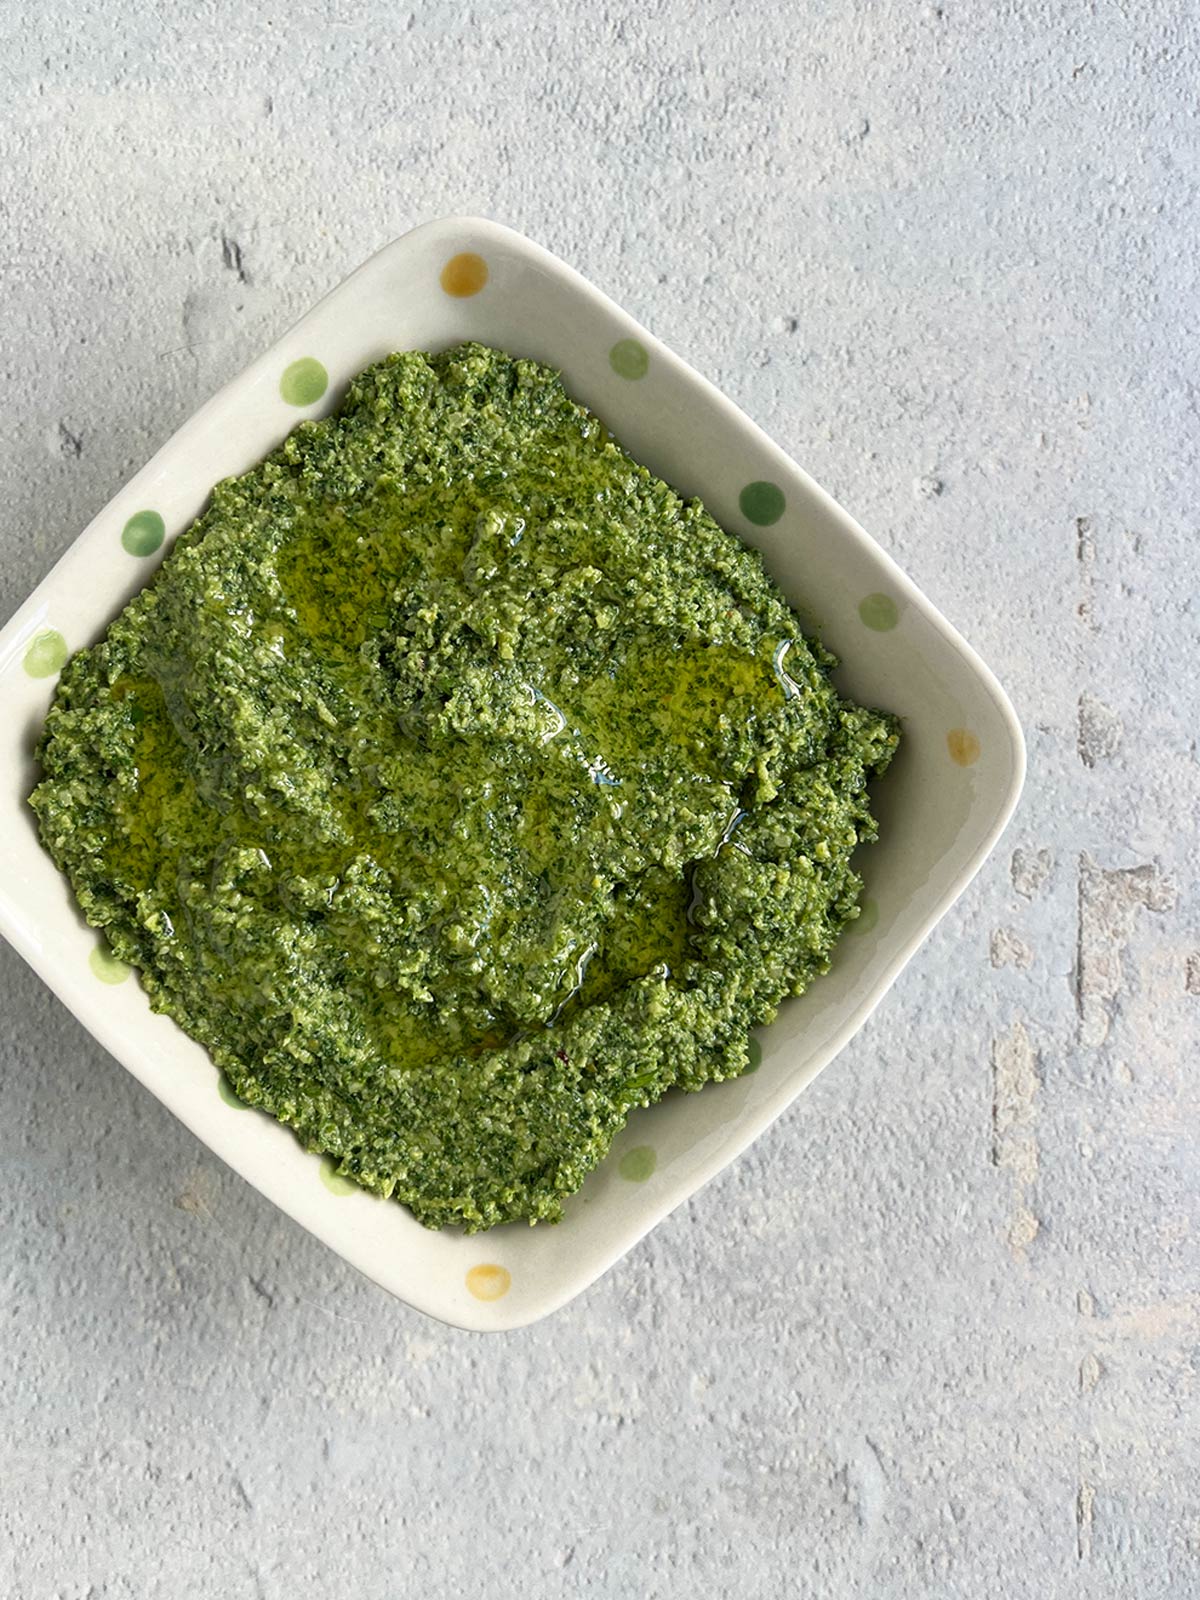 Carrot top, arugula, parsley pesto in a polka dot bowl with oil drizzled on top.